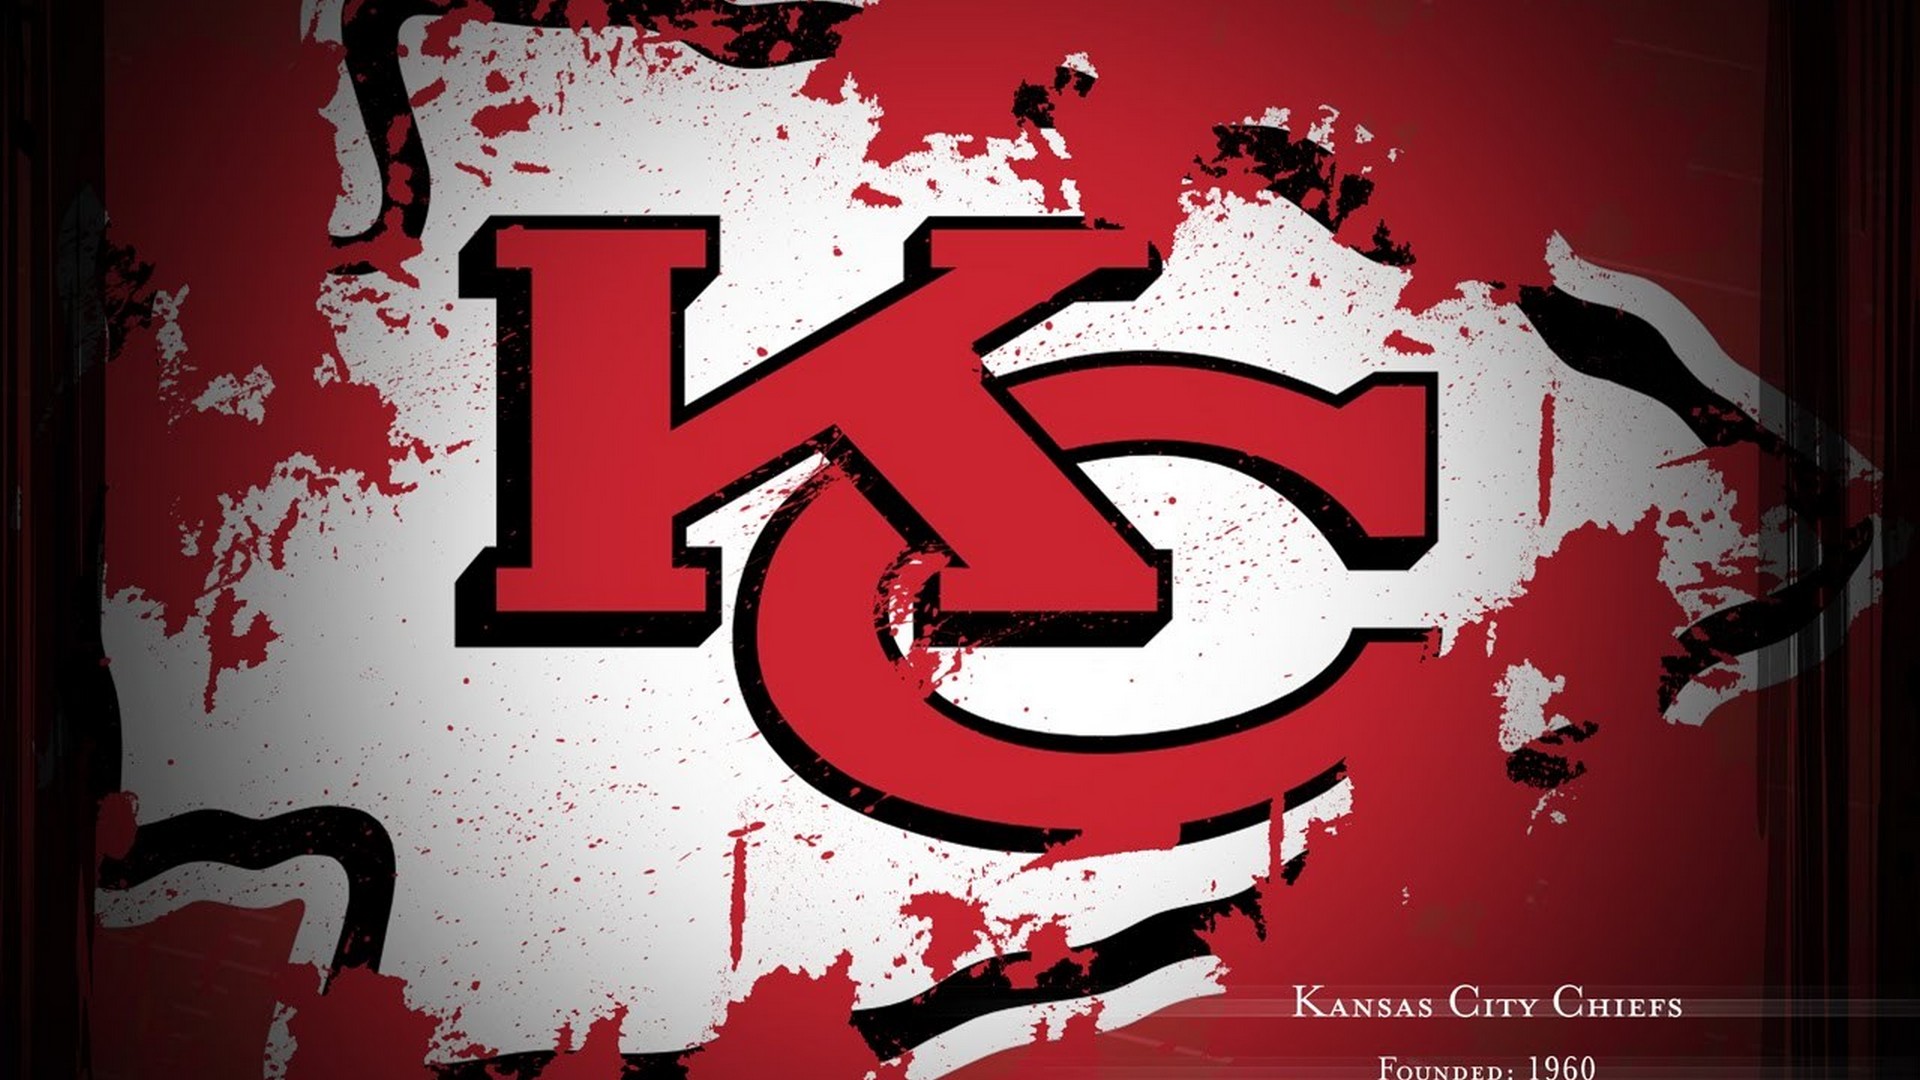 Kansas City Chiefs Desktop Wallpaper with resolution 1920x1080 pixel. You can make this wallpaper for your Mac or Windows Desktop Background, iPhone, Android or Tablet and another Smartphone device